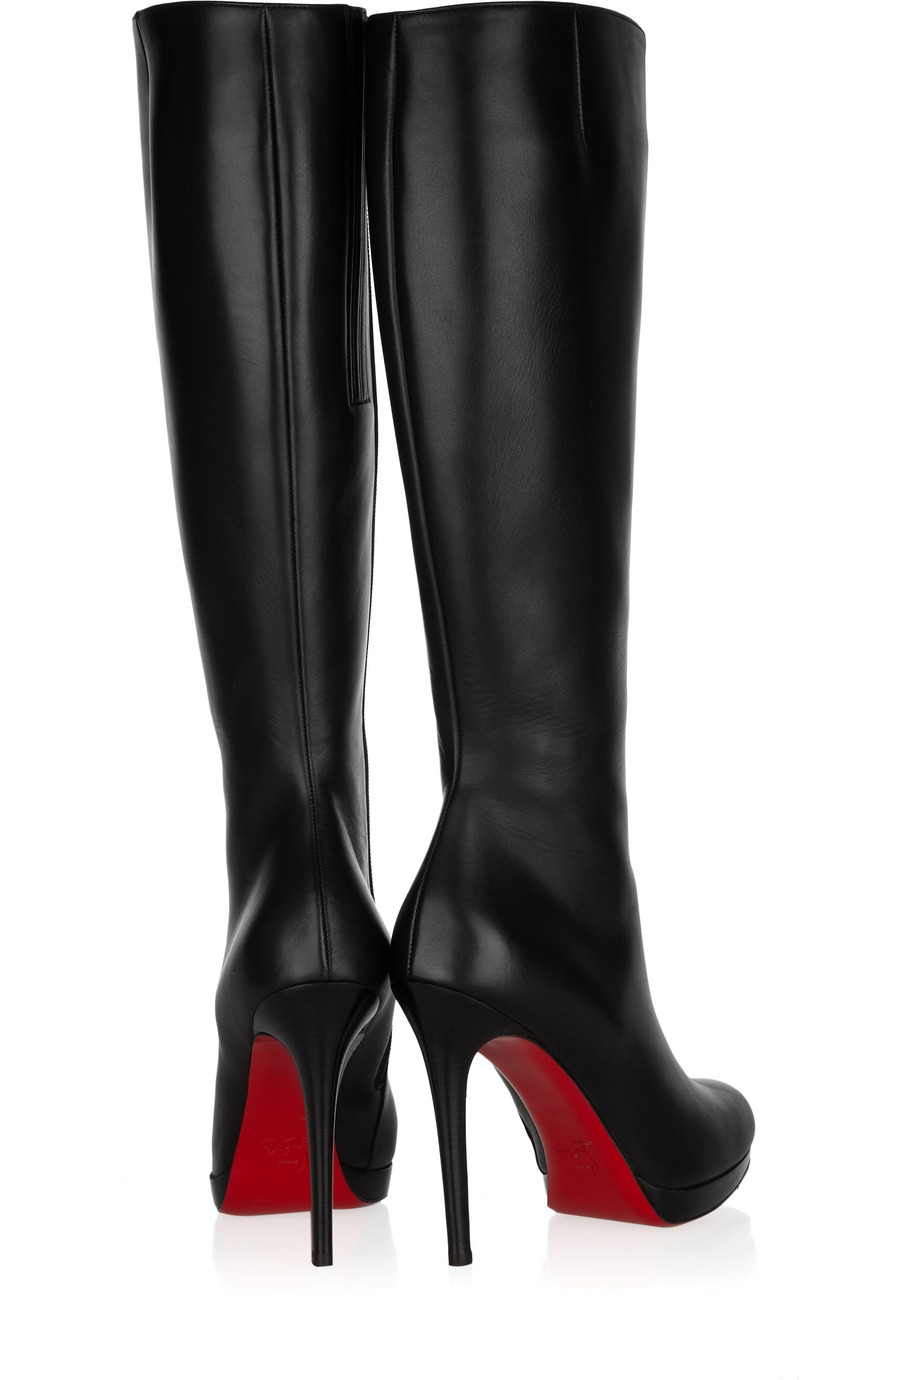 Christian louboutin New Simple Botta 120 Leather Knee Boots in Black | Lyst